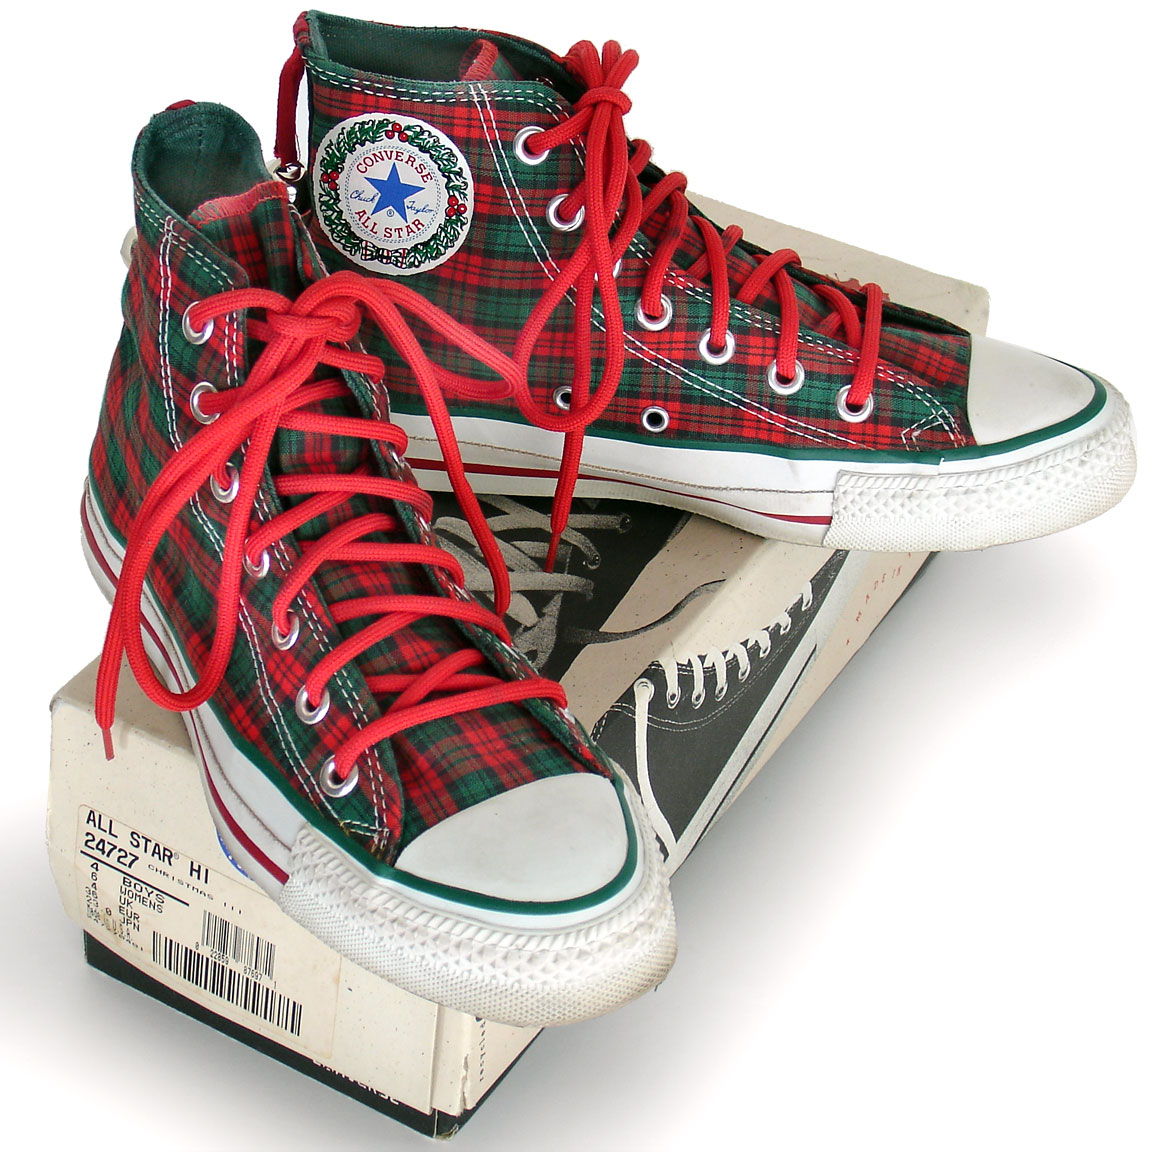 Vintage American-made Converse All Star Chuck Taylor Christmas plaid shoes for sale at http://www.collectornet.net/shoes